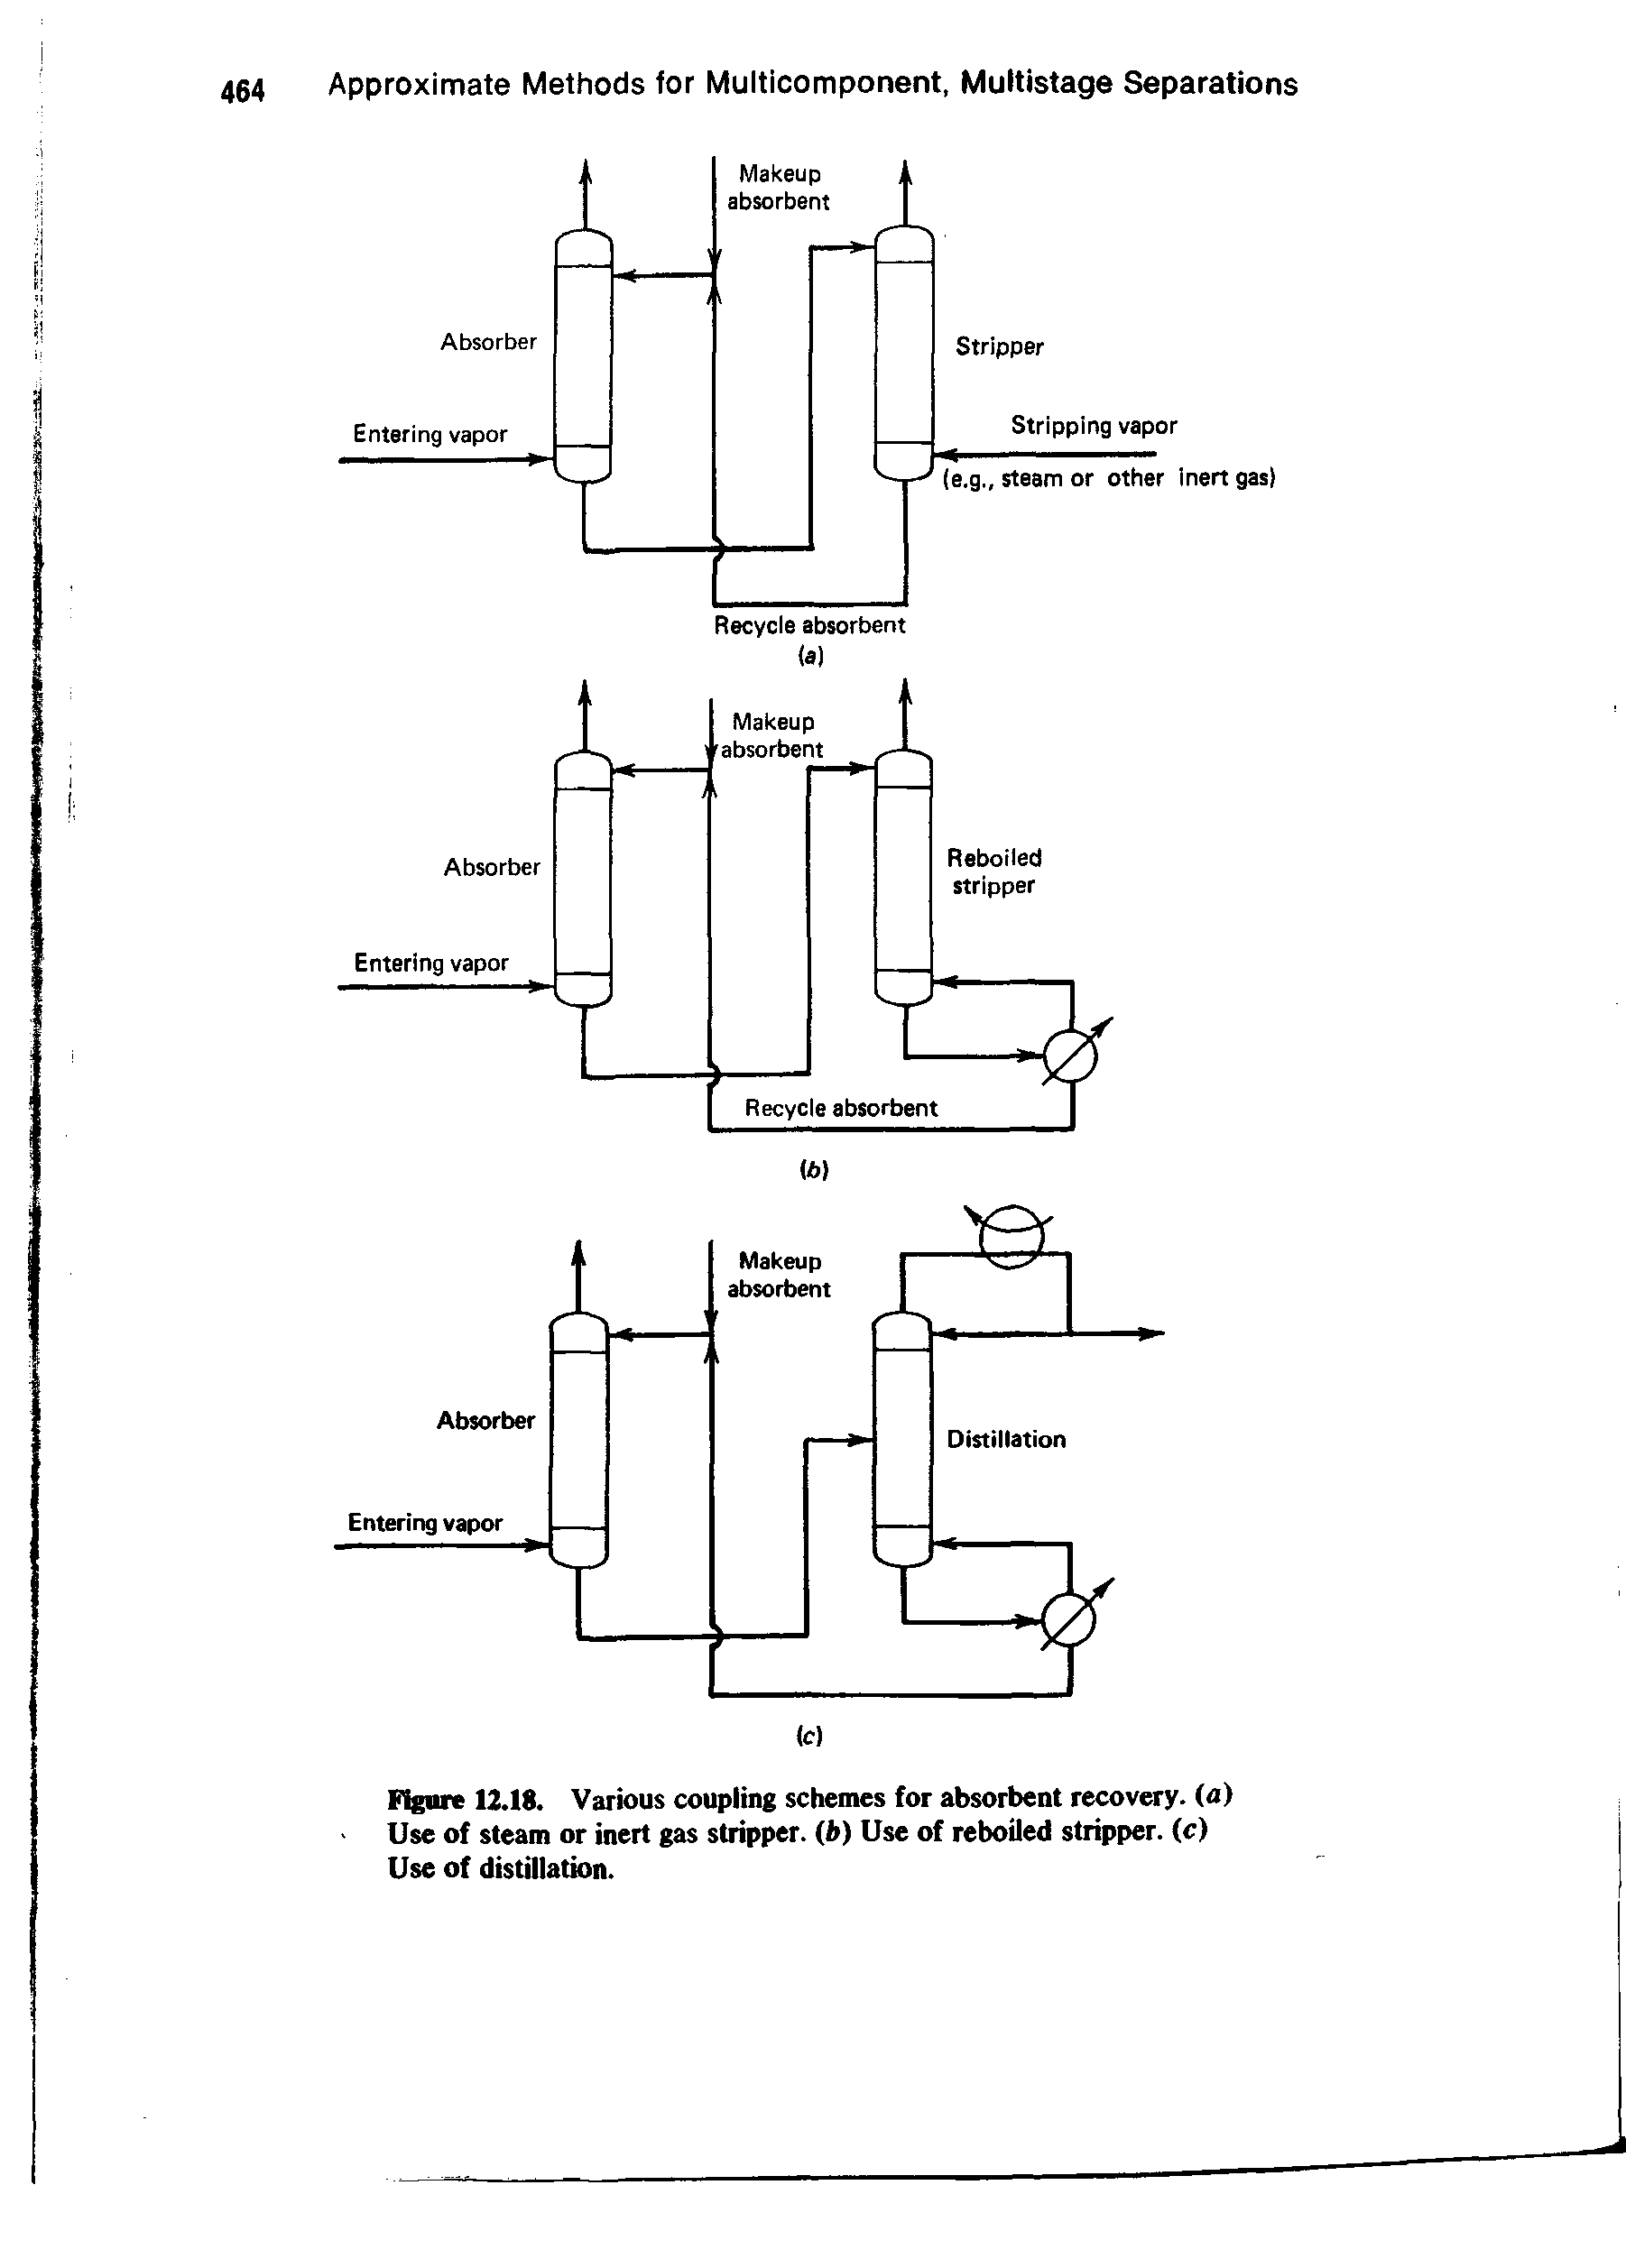 Figure 12.18. Various coupling schemes for absorbent recovery, (u) Use of steam or inert gas stripper. (i ) Use of reboiled stripper, (c) Use of distillation.